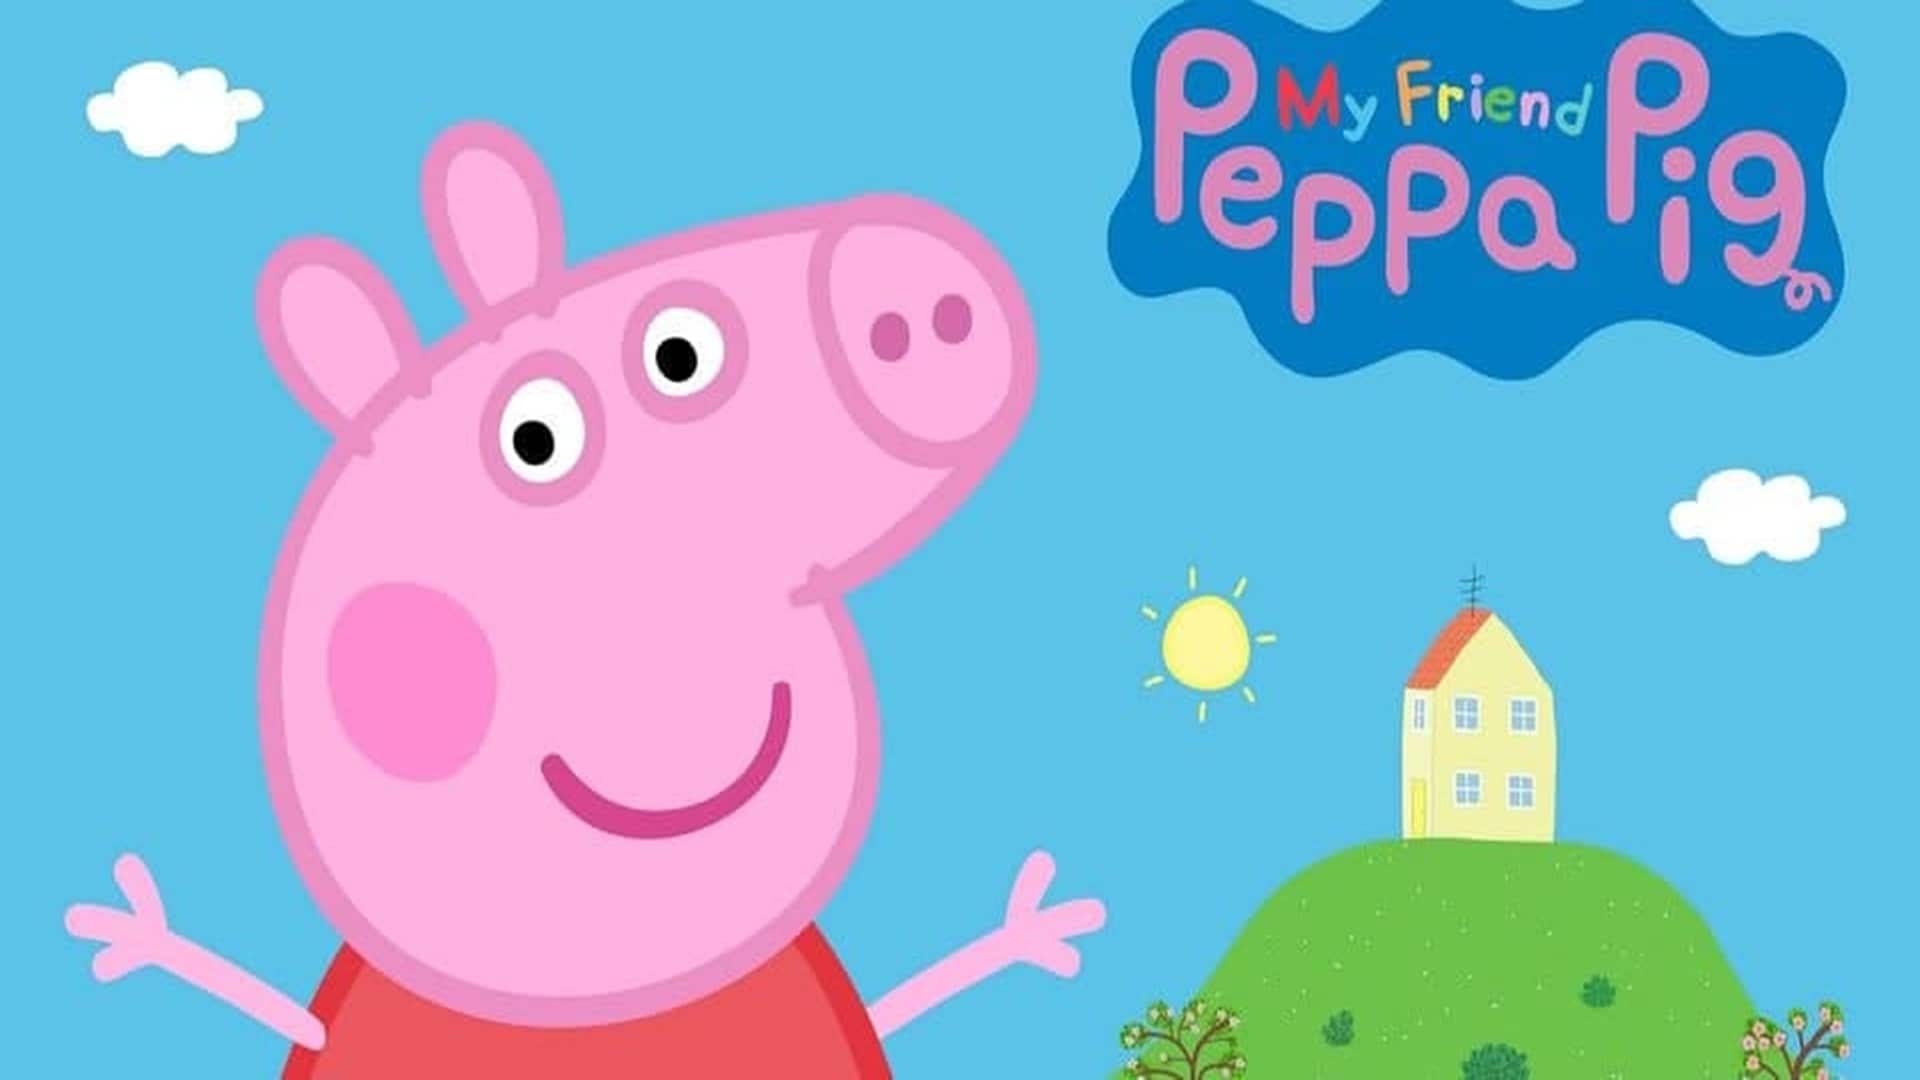 My Friend Peppa Pig has a higher user rating than Battlefield, CoD and GTA Trilogy combined, GamersRD